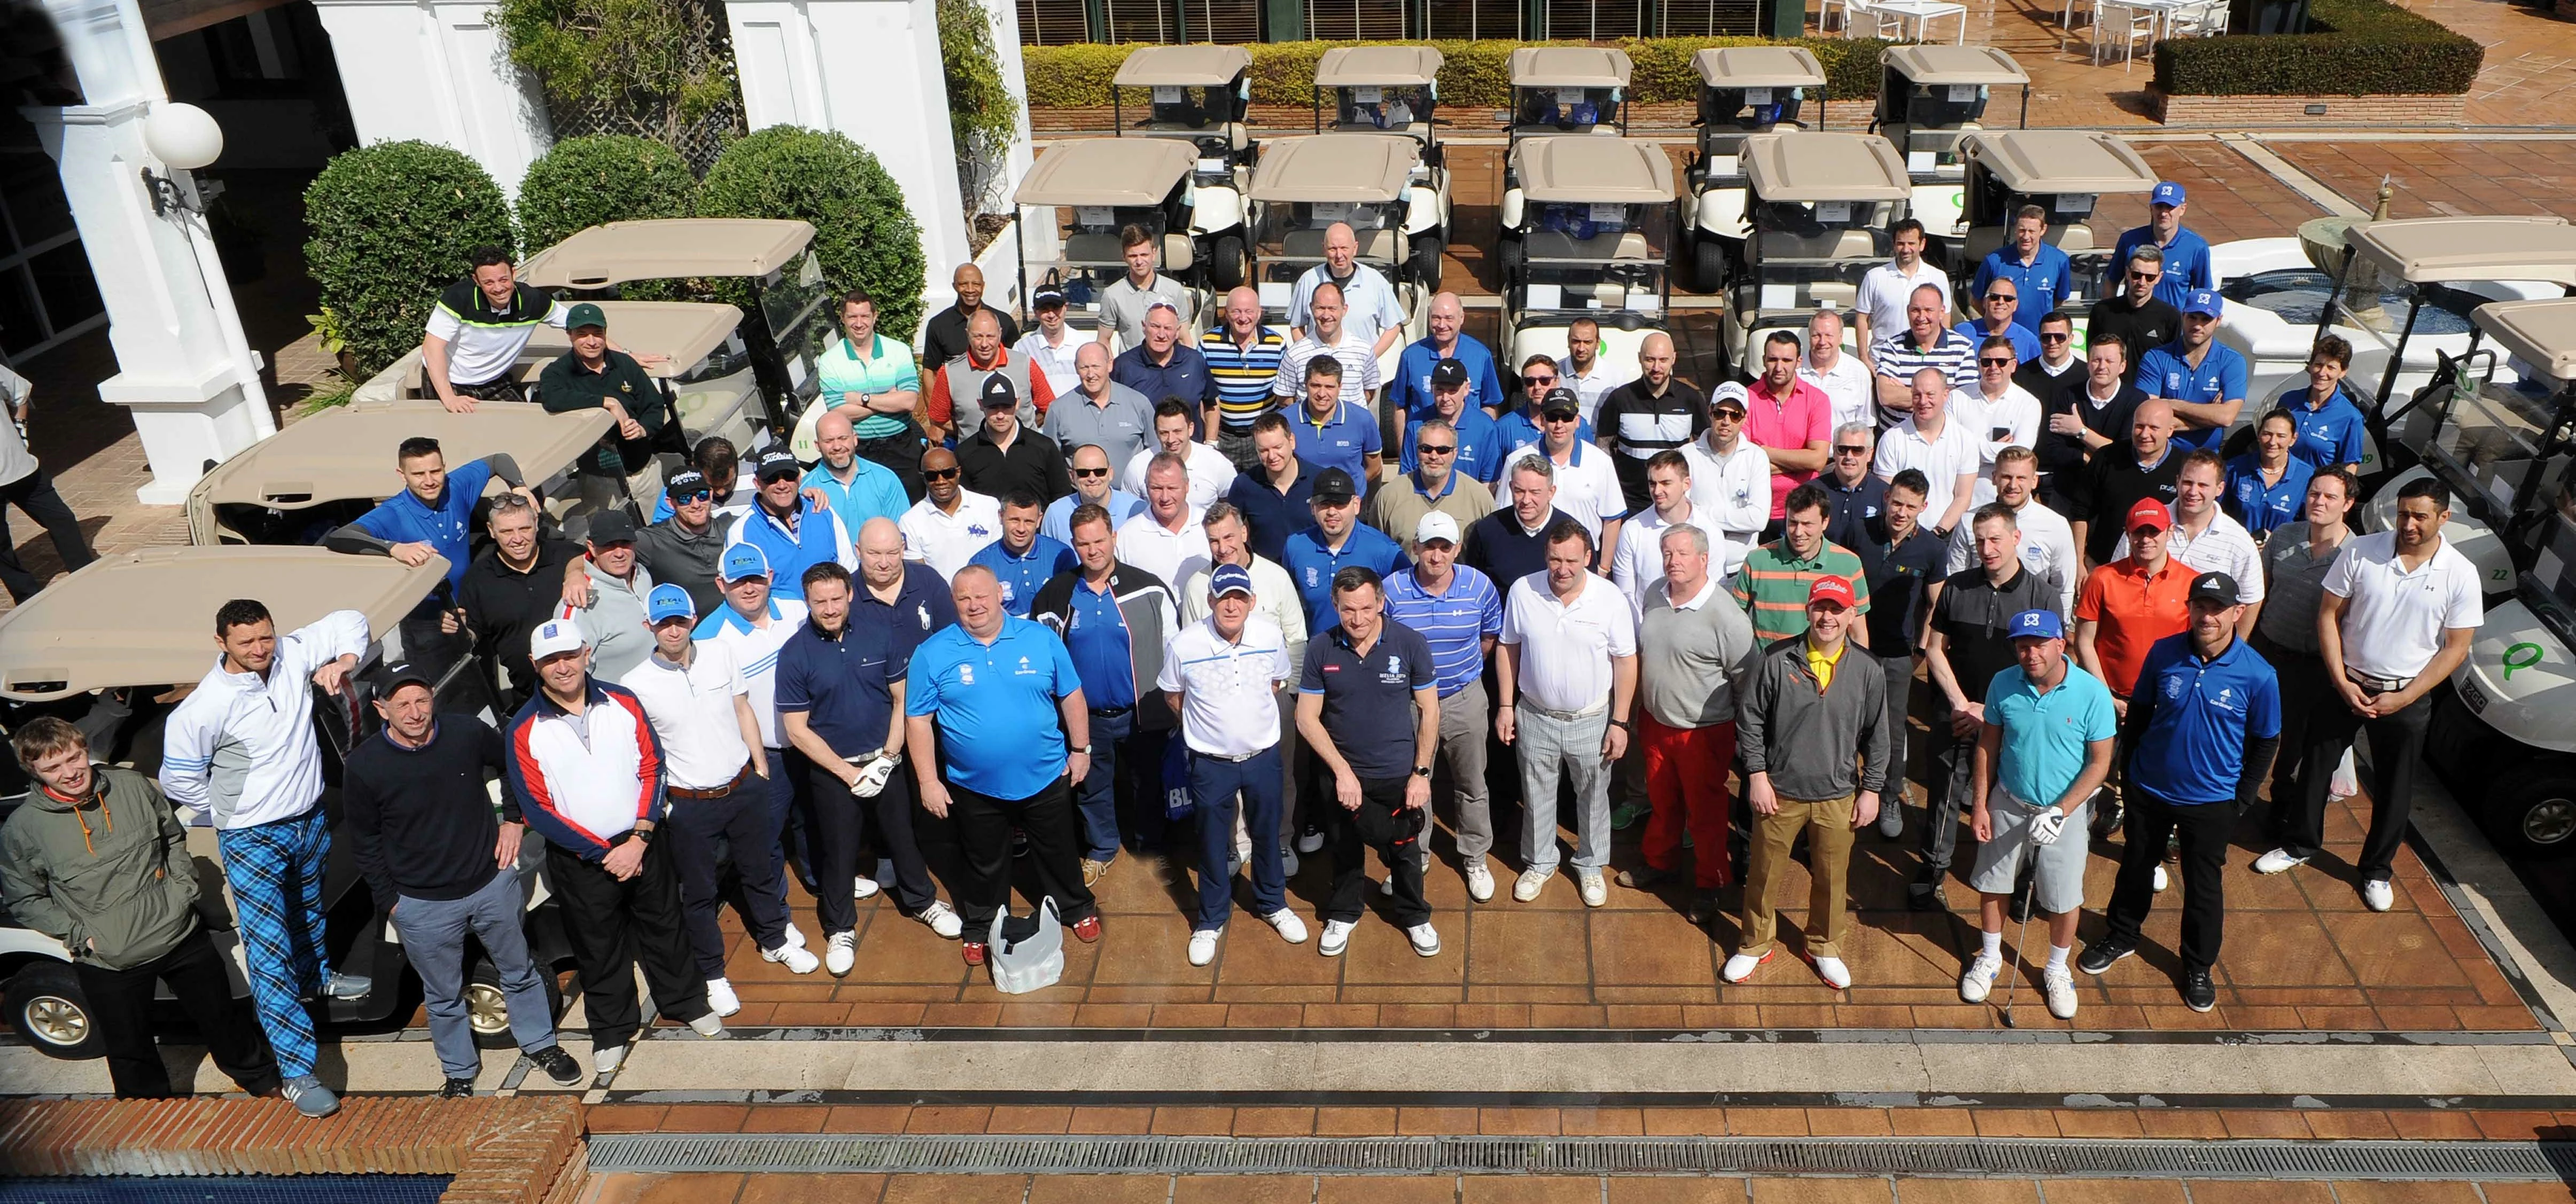 The golfers ready to tee off at Birmingham City's FC's annual golf day, sponsored by NoVate.